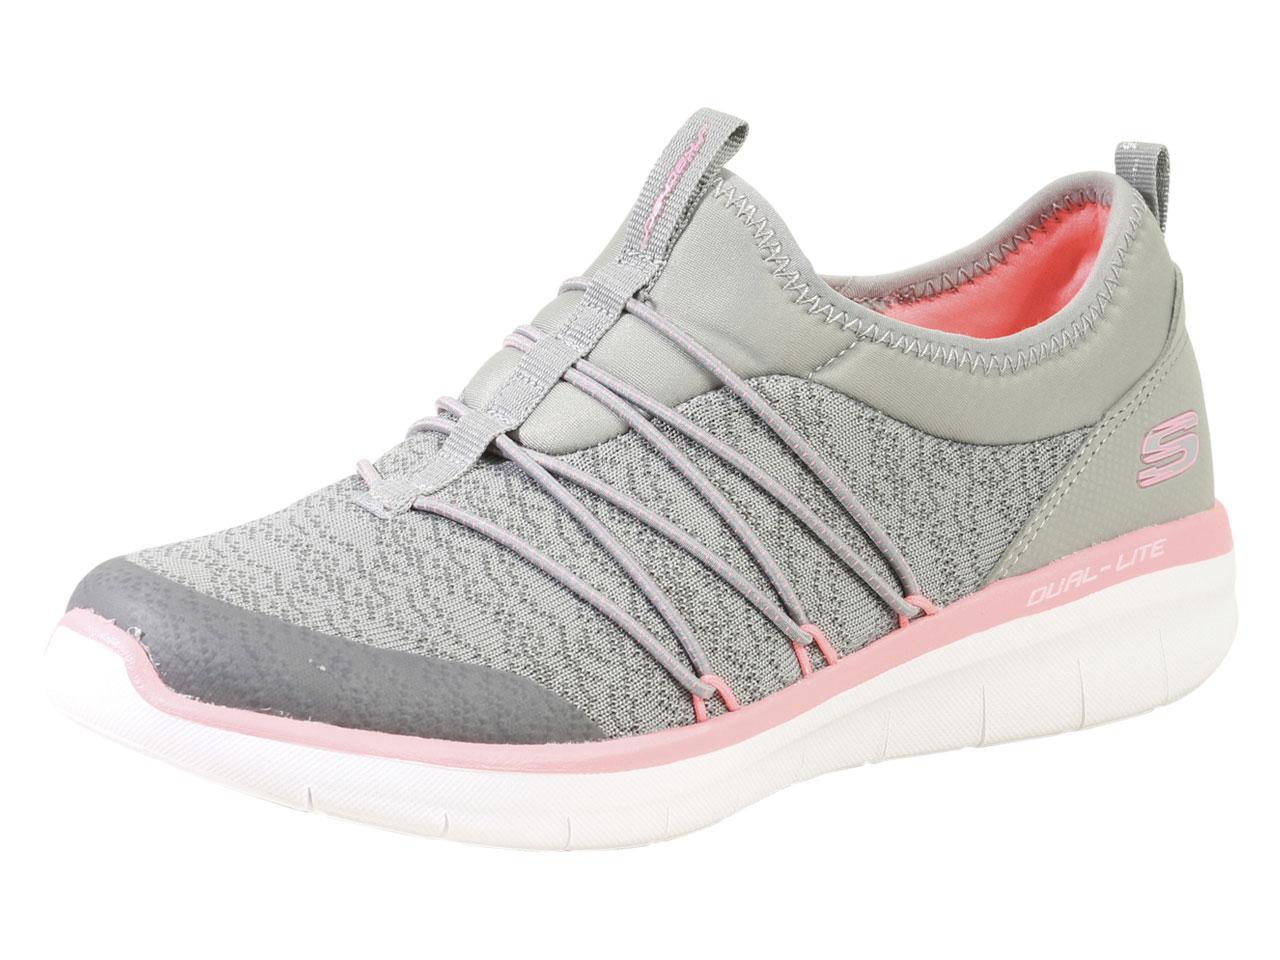 Skechers Women's Synergy 2.0 Simply Chic Memory Foam Sneakers Shoes - Gray/Pink - 10 B(M) US